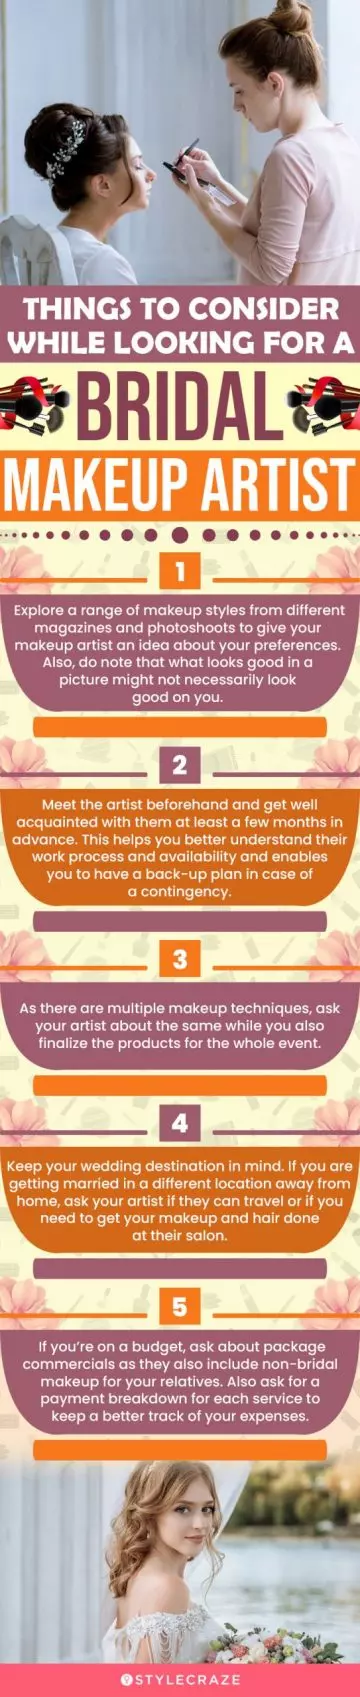 things to consider while looking for a bridal makeup artist (infographic)